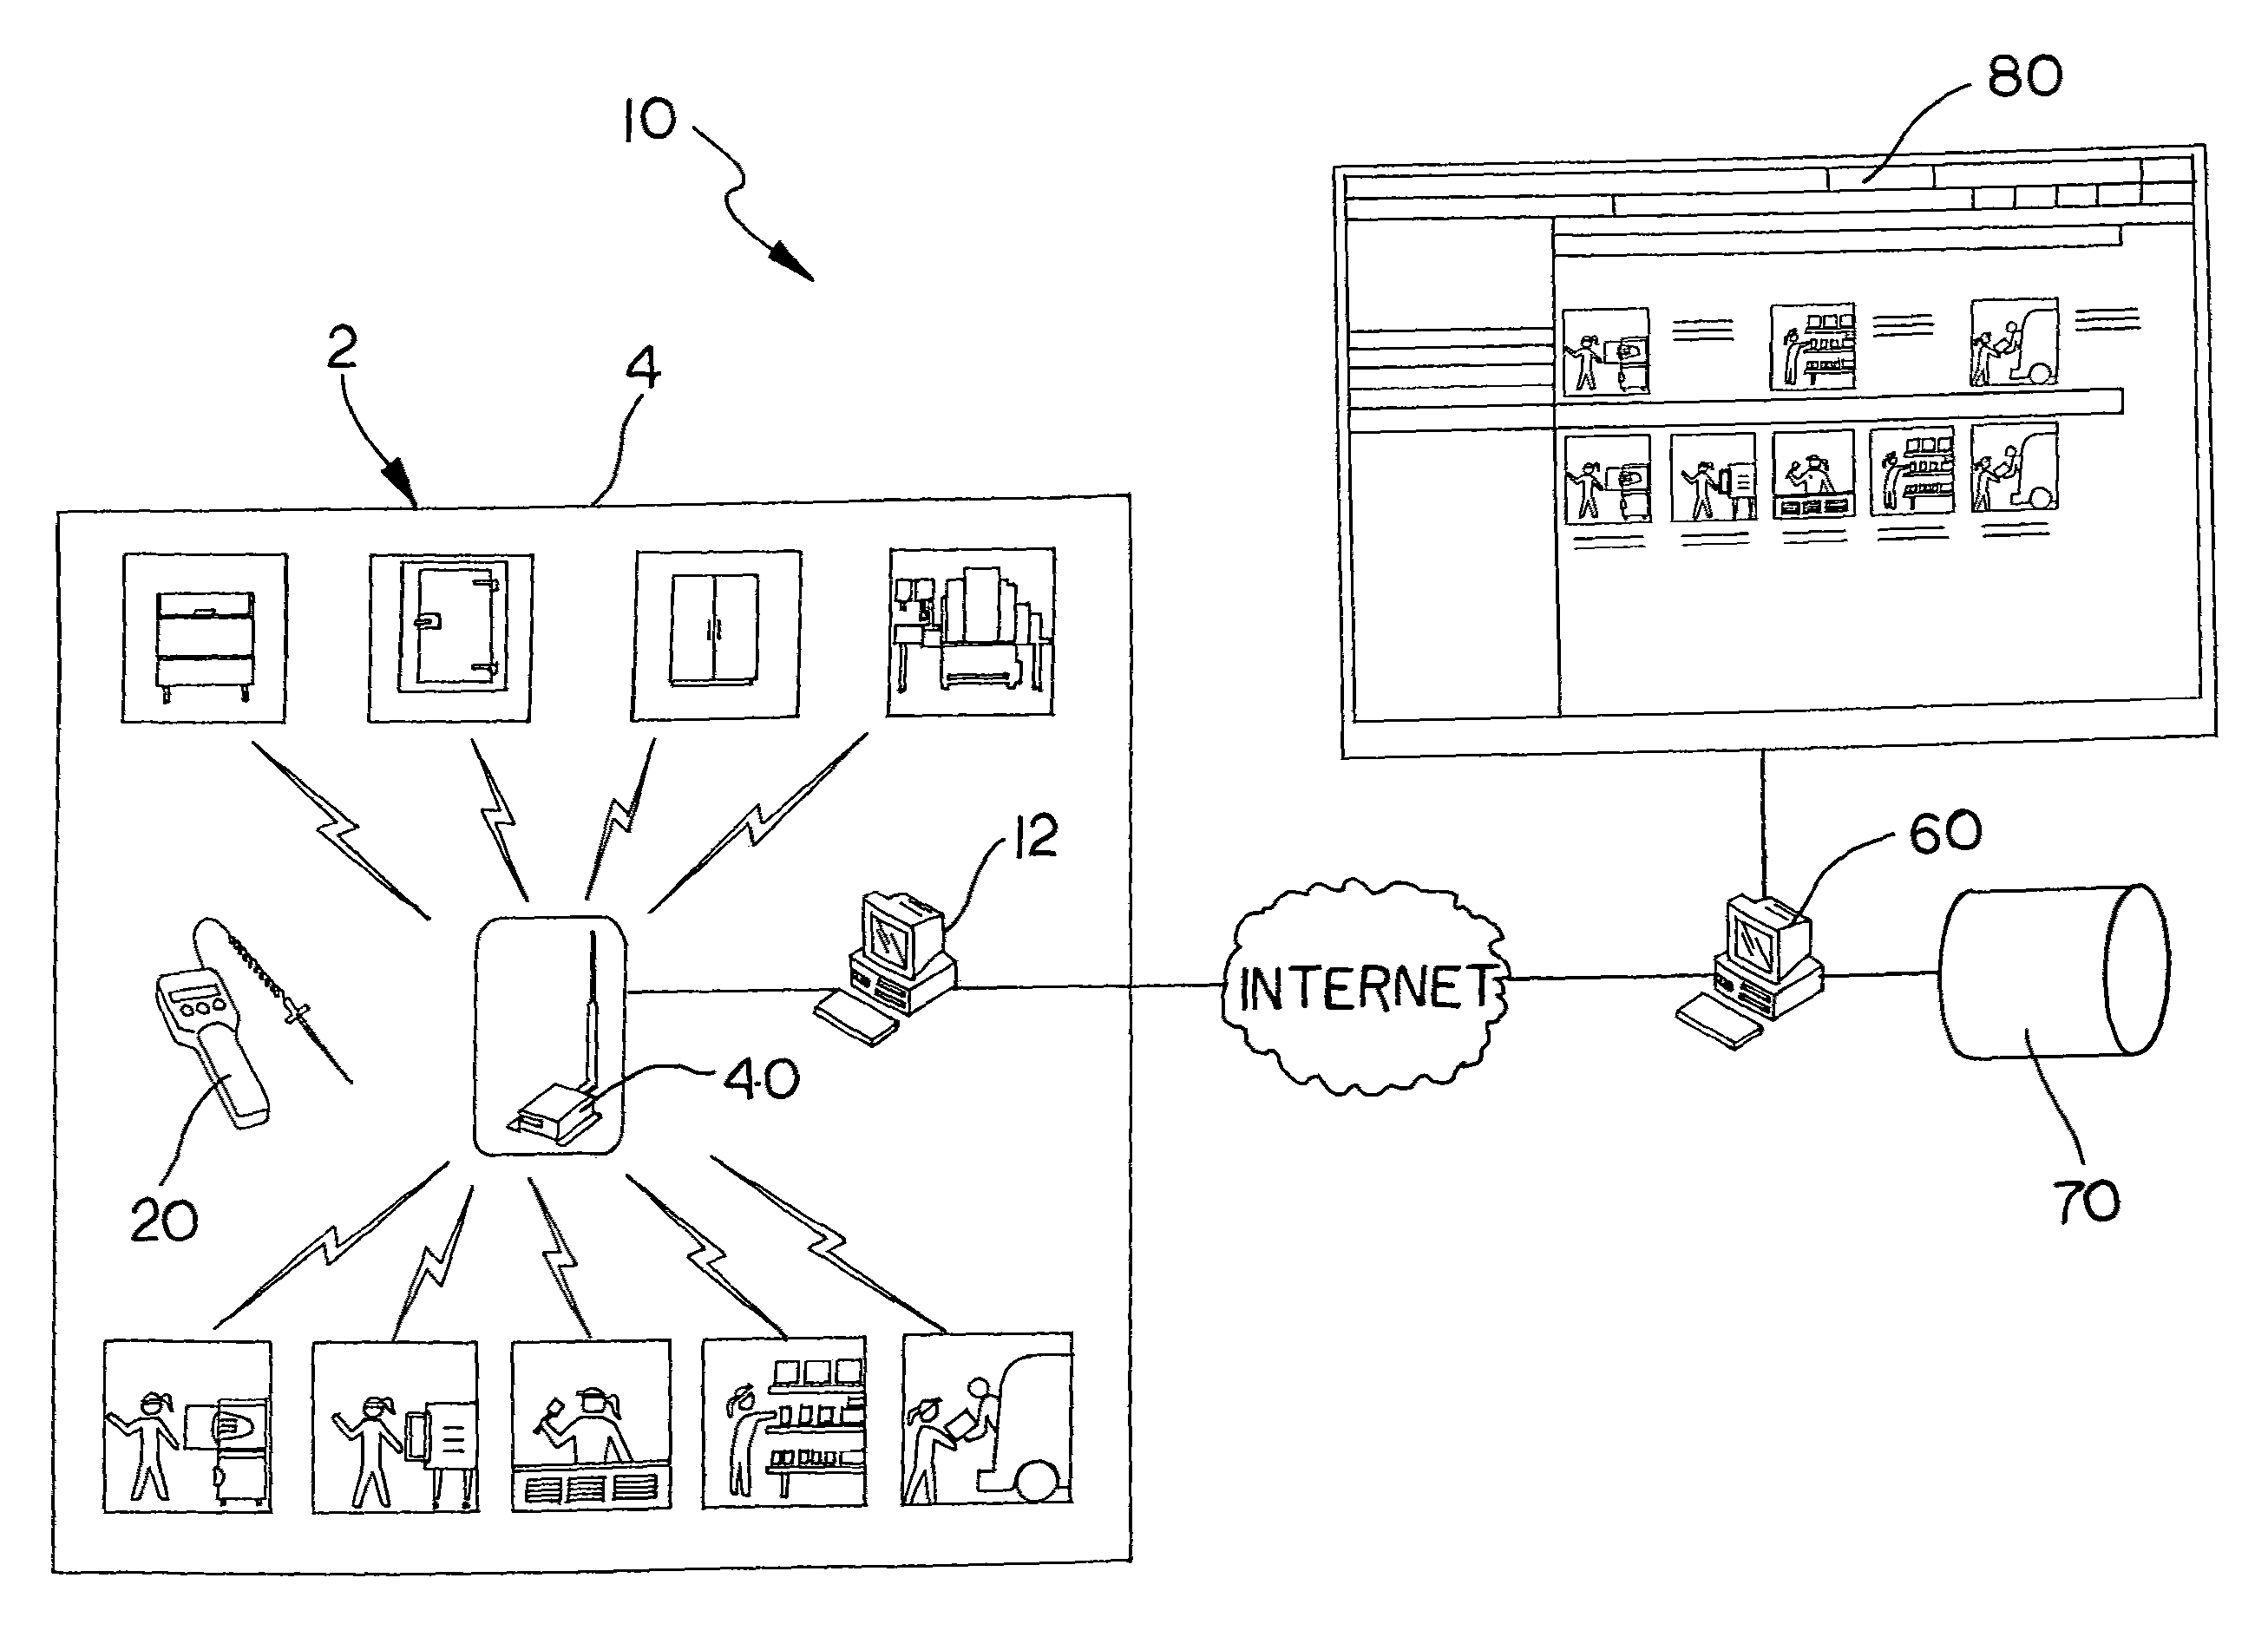 System and method for collecting, transferring and managing quality control data